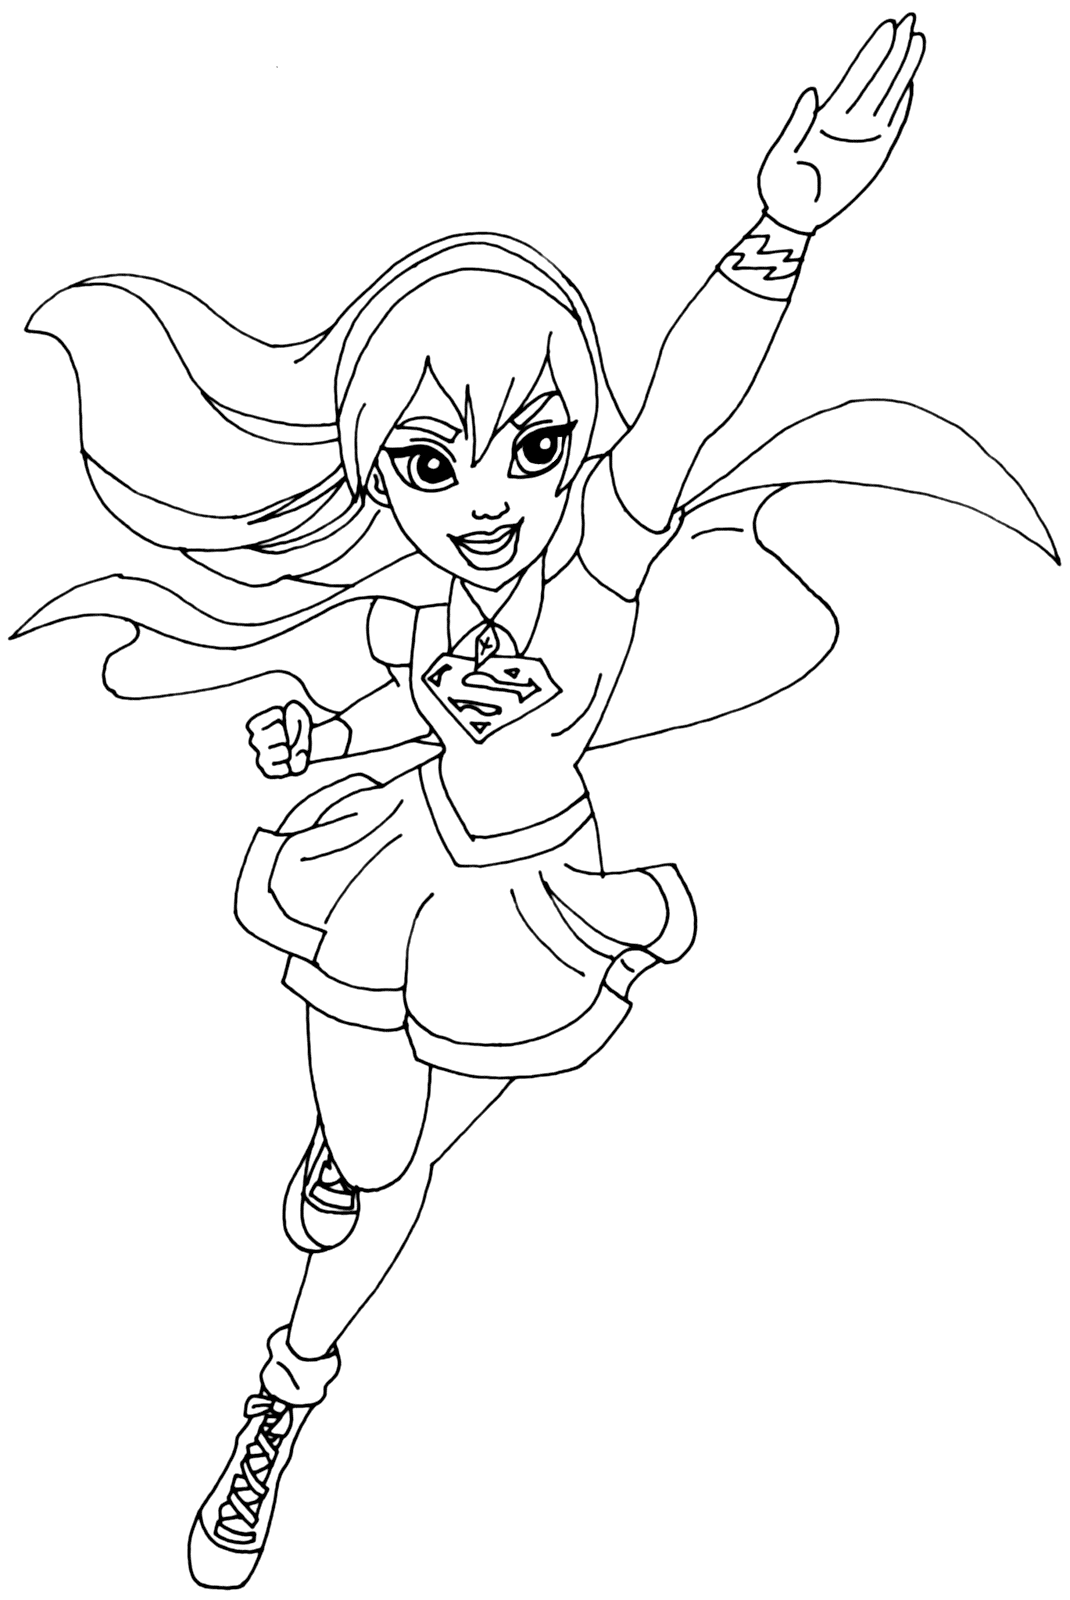 Supergirl Dc Super Hero Girls Coloring Page